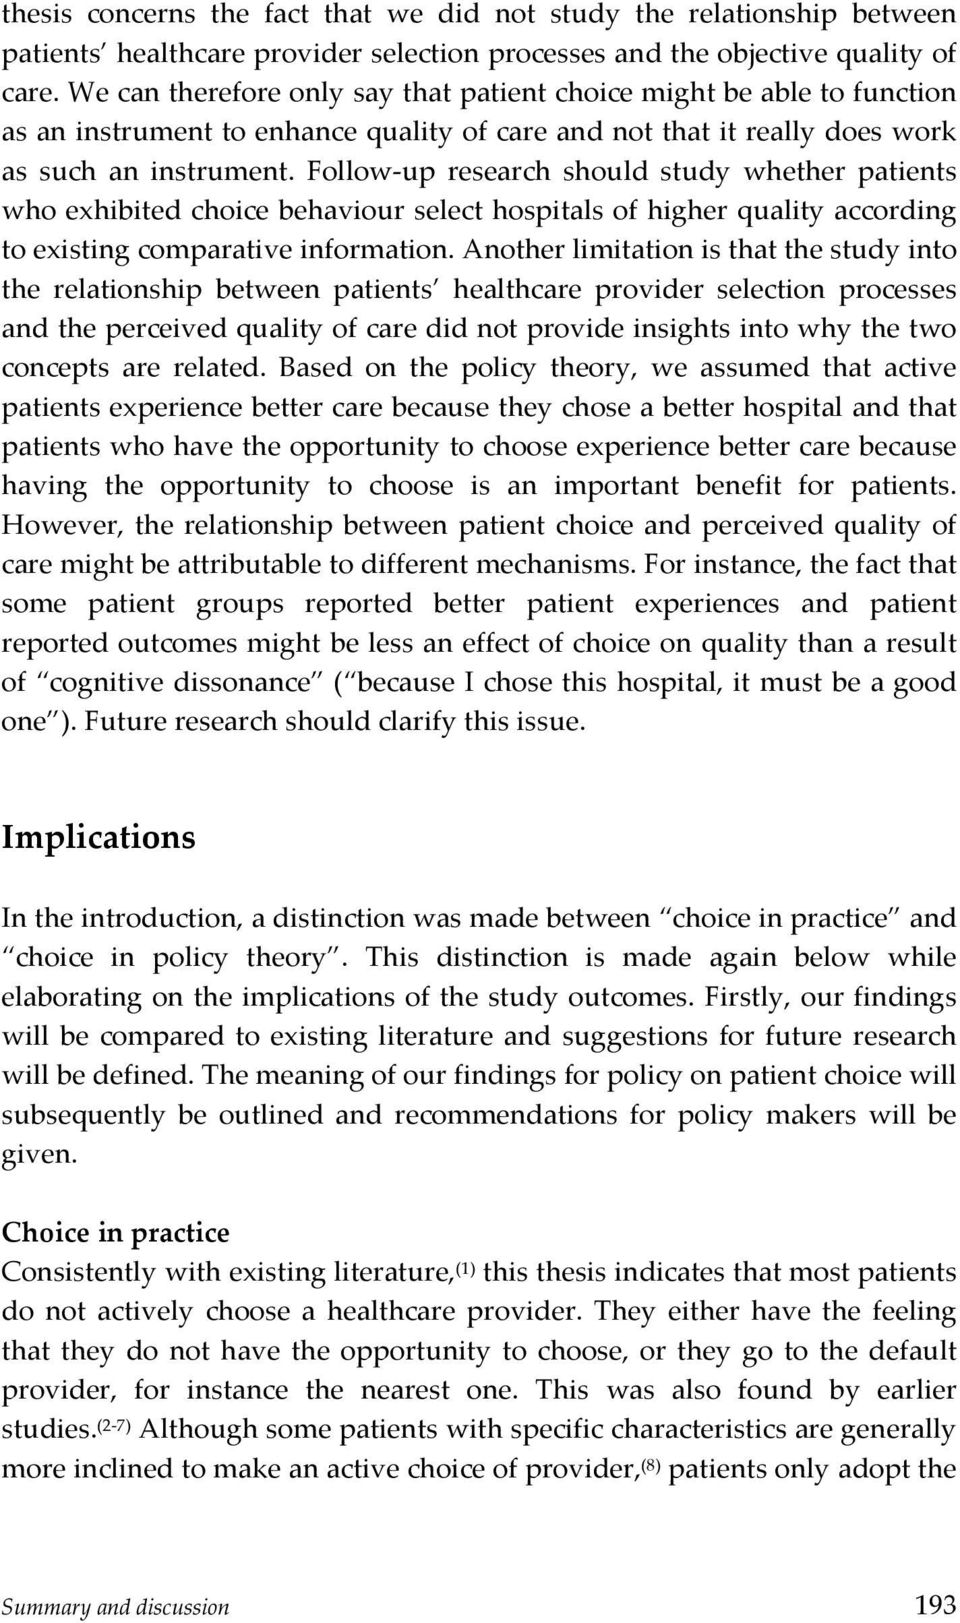 FollowVup research should study whether patients whoexhibitedchoicebehaviourselecthospitalsofhigherqualityaccording toexistingcomparativeinformation.